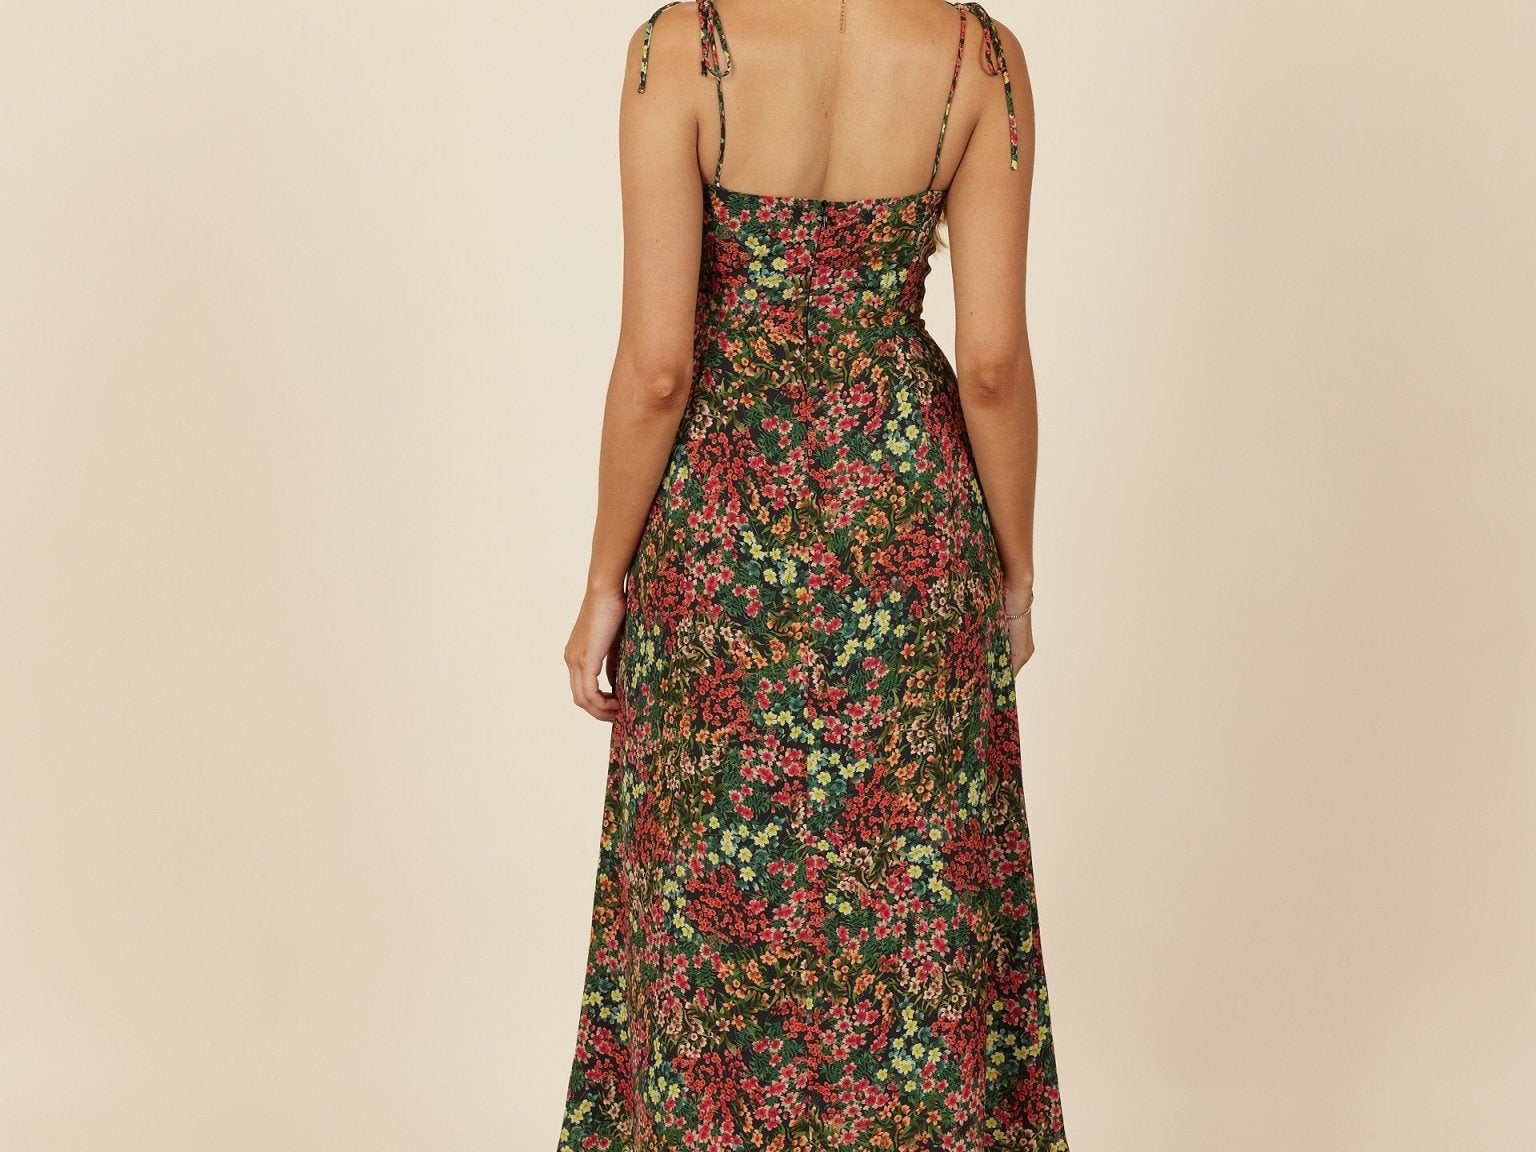 Willow Dress - Park & Fifth Clothing Co